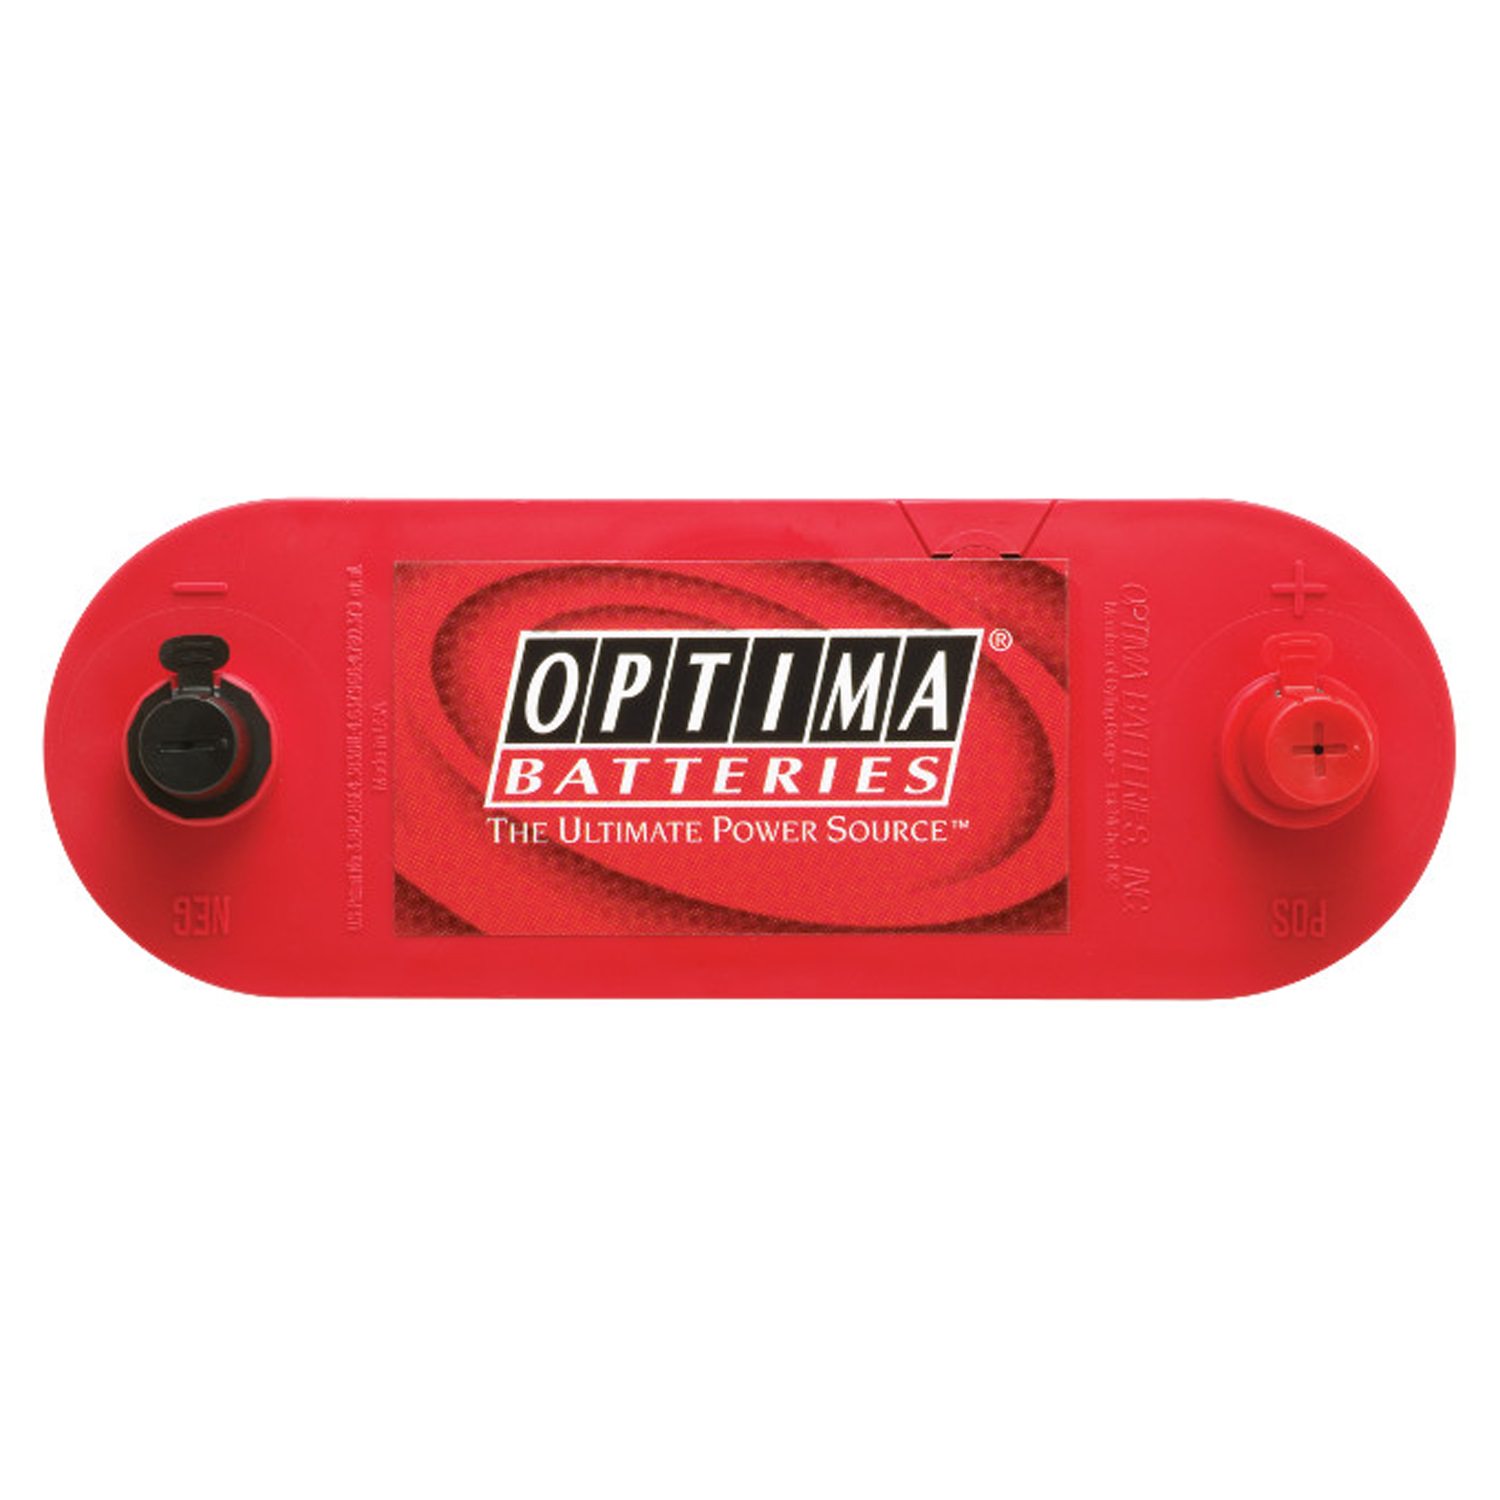 OPTIMA RedTop AGM Spiralcell Automotive Starting Battery, Group Size 6 Volt 800 CCA - image 3 of 3